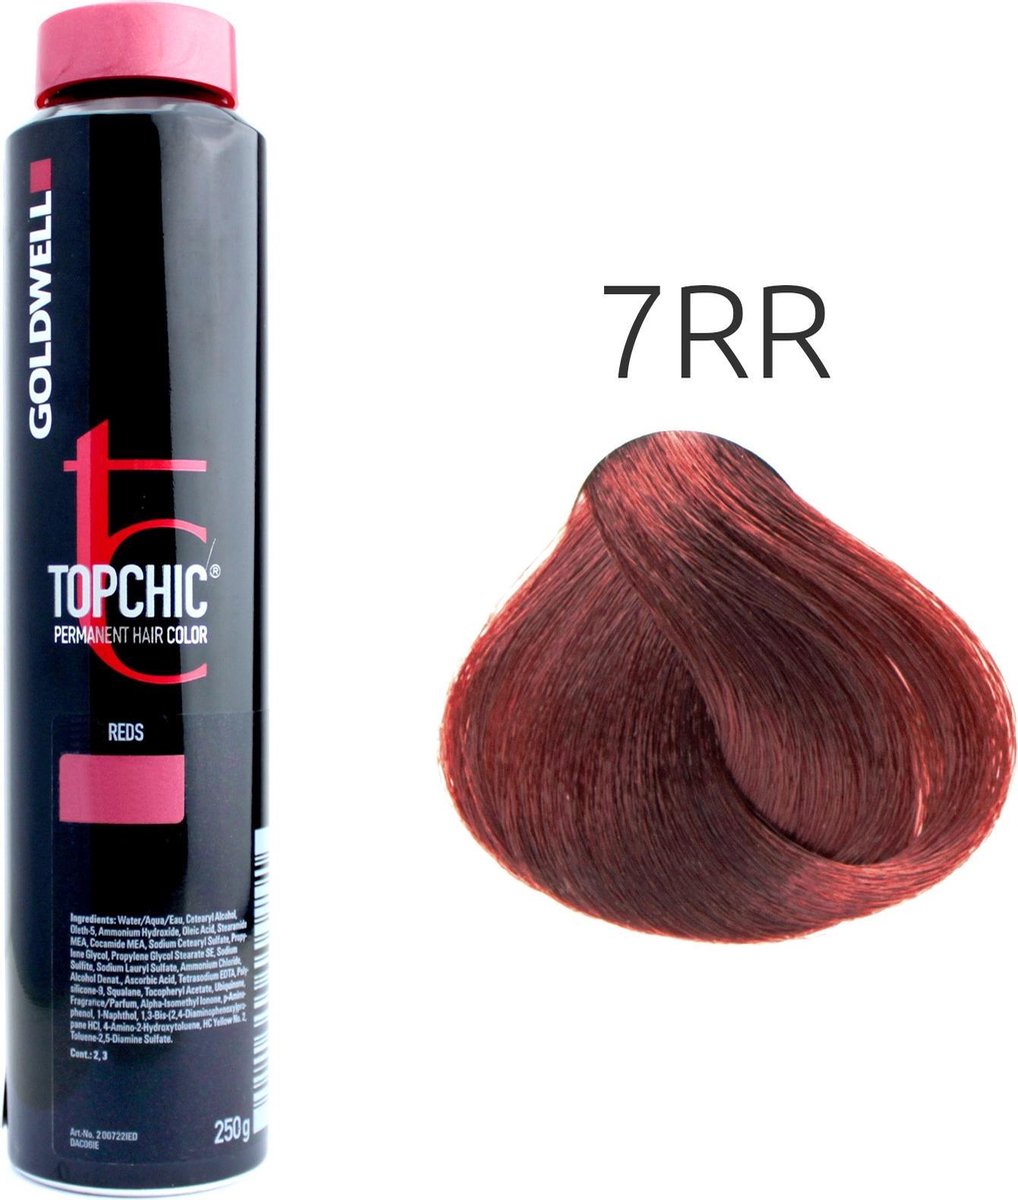 Goldwell - Topchic Depot Bus - 7-RR Luscious Red - 250 ml